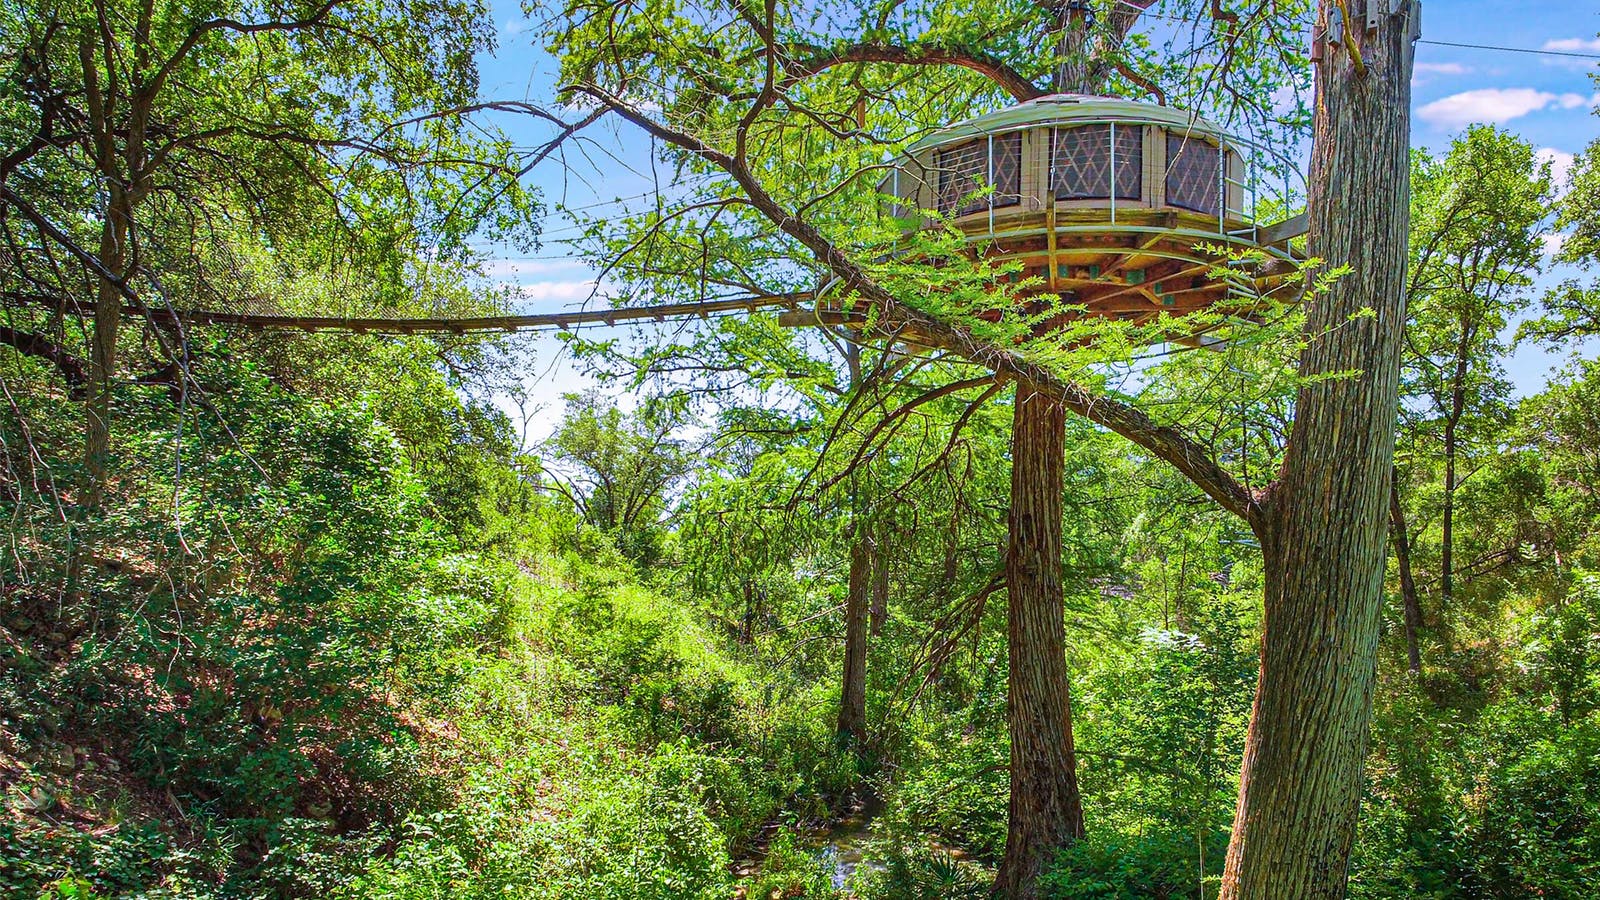 Get Lost in the Woods at These Five Magical Texas Treehouses